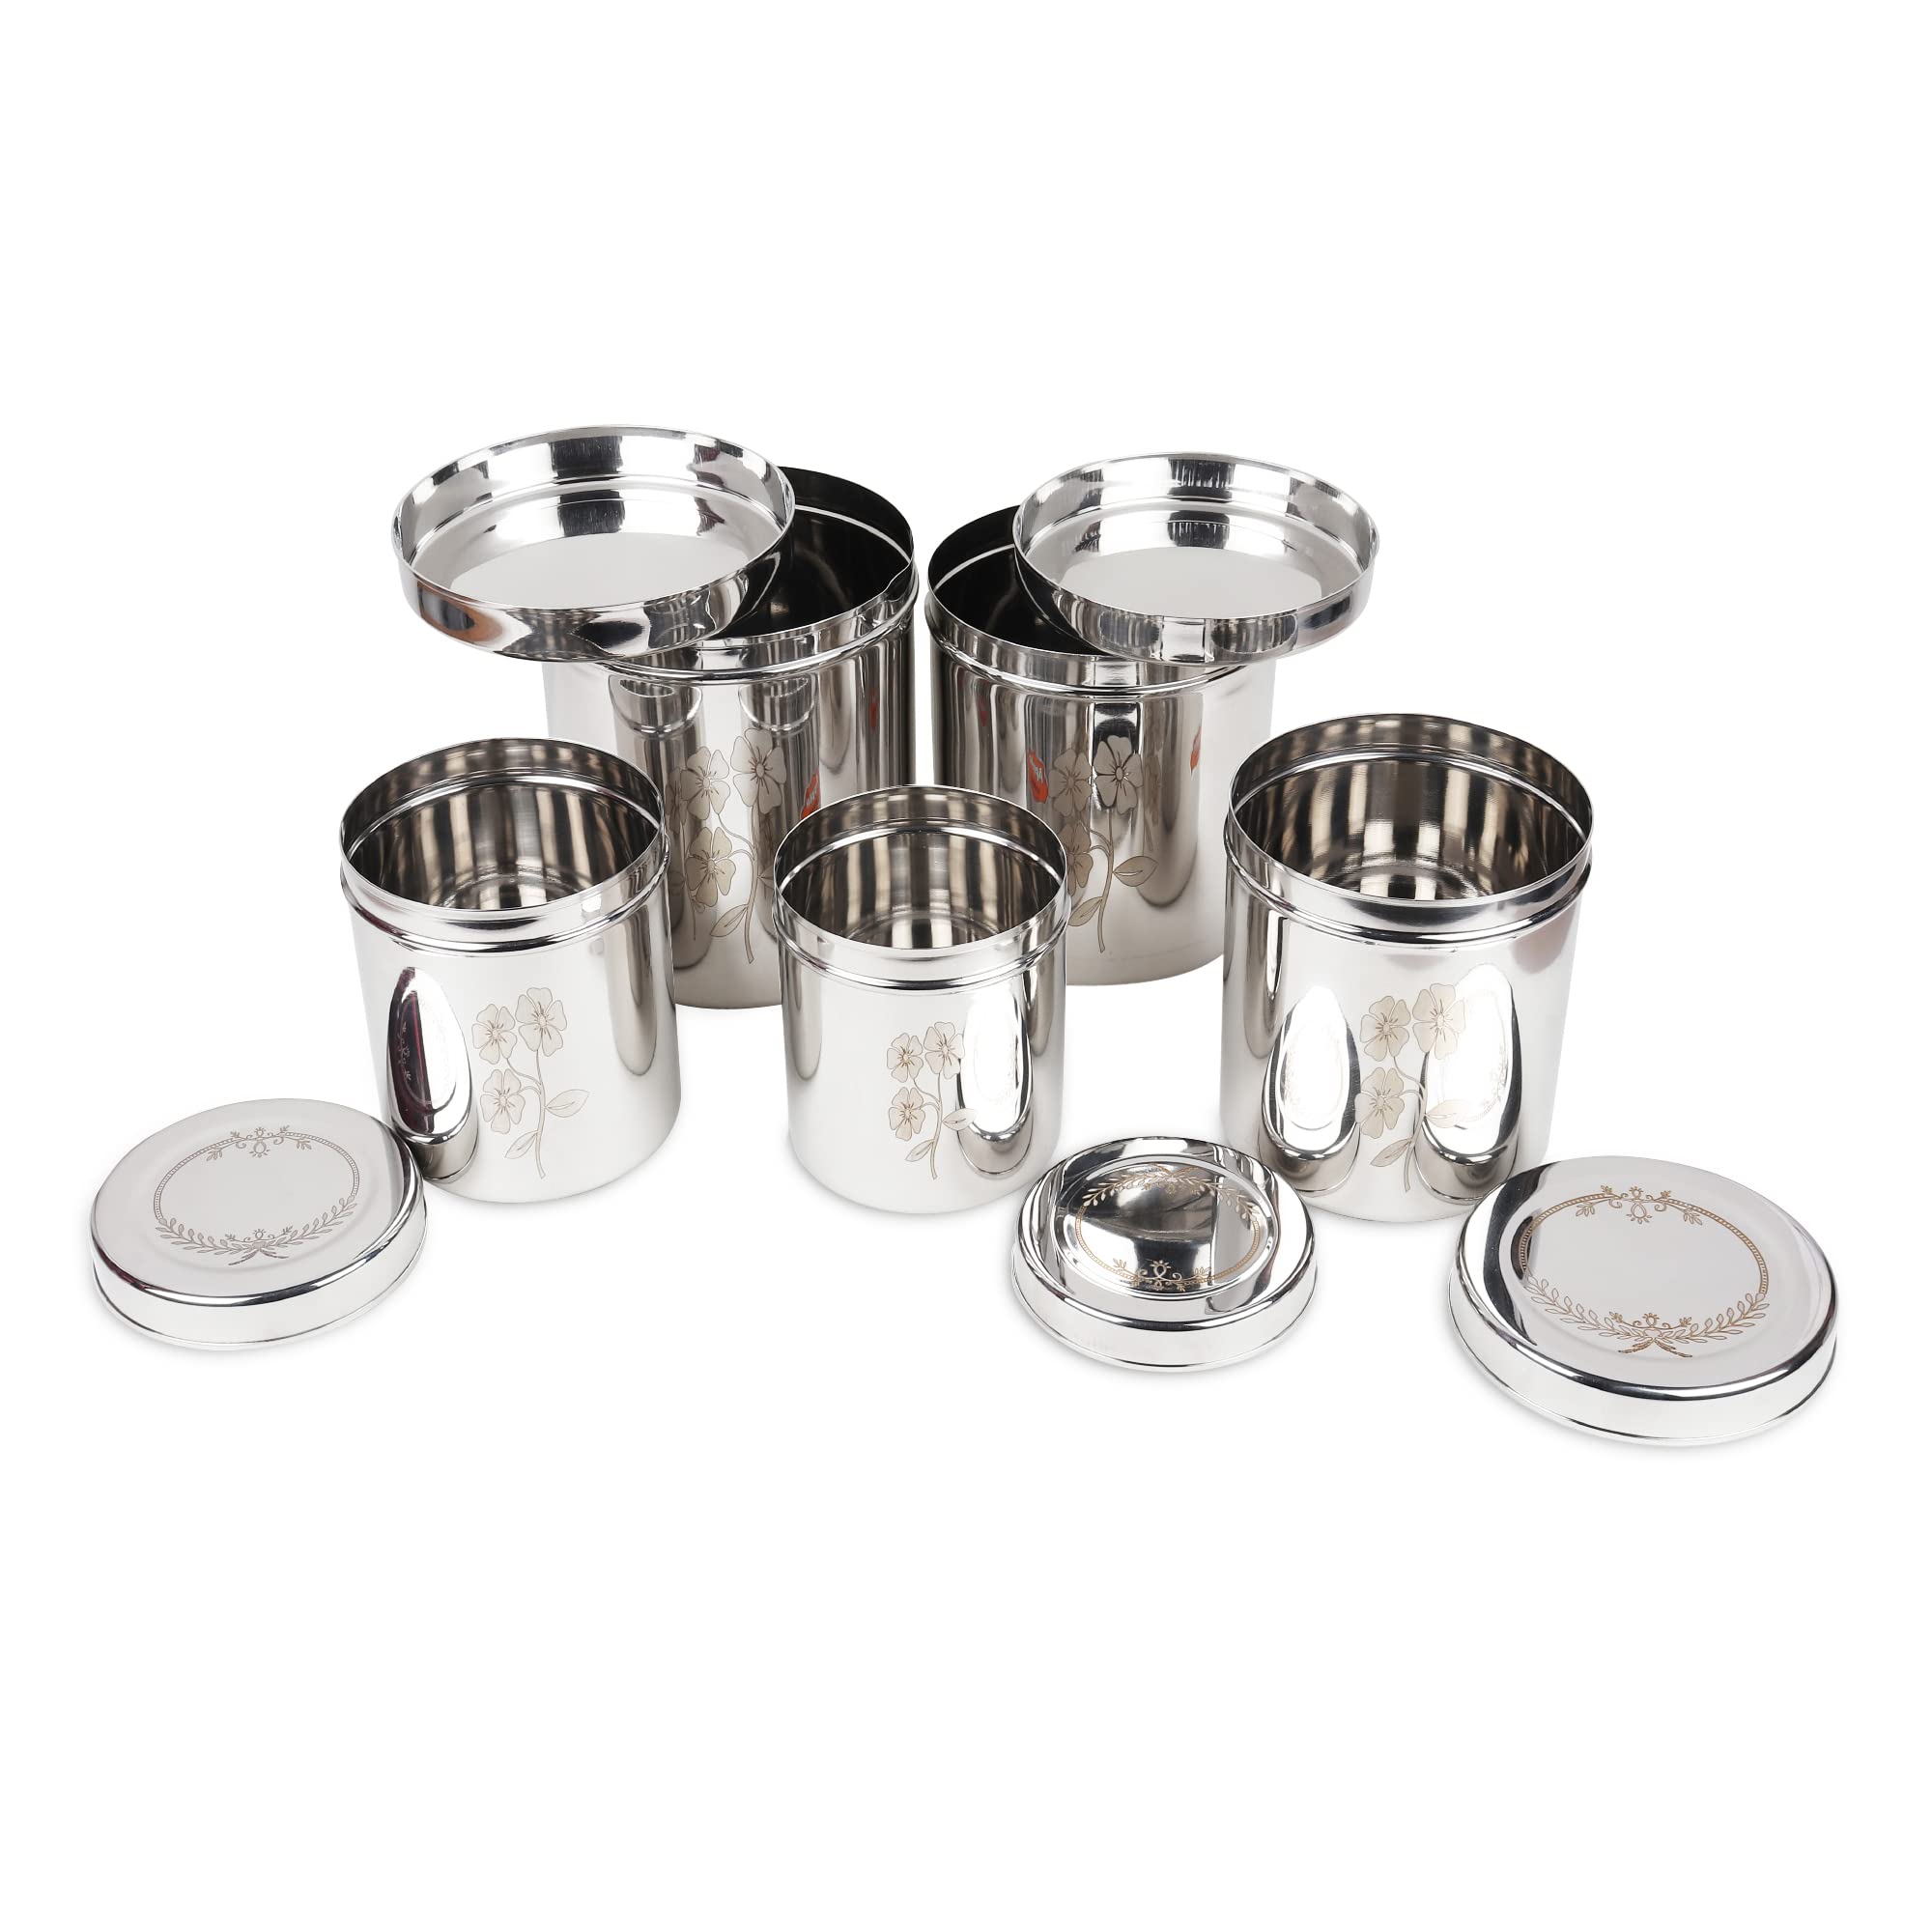 DOKCHAN Stainless Steel Laser Print Containers For Kitchen |2500ml, 2000ml, 1750ml, 1250ml, 1000ml (Pack of 5) | Kitchen Storage Container | Dabba For Kitchen